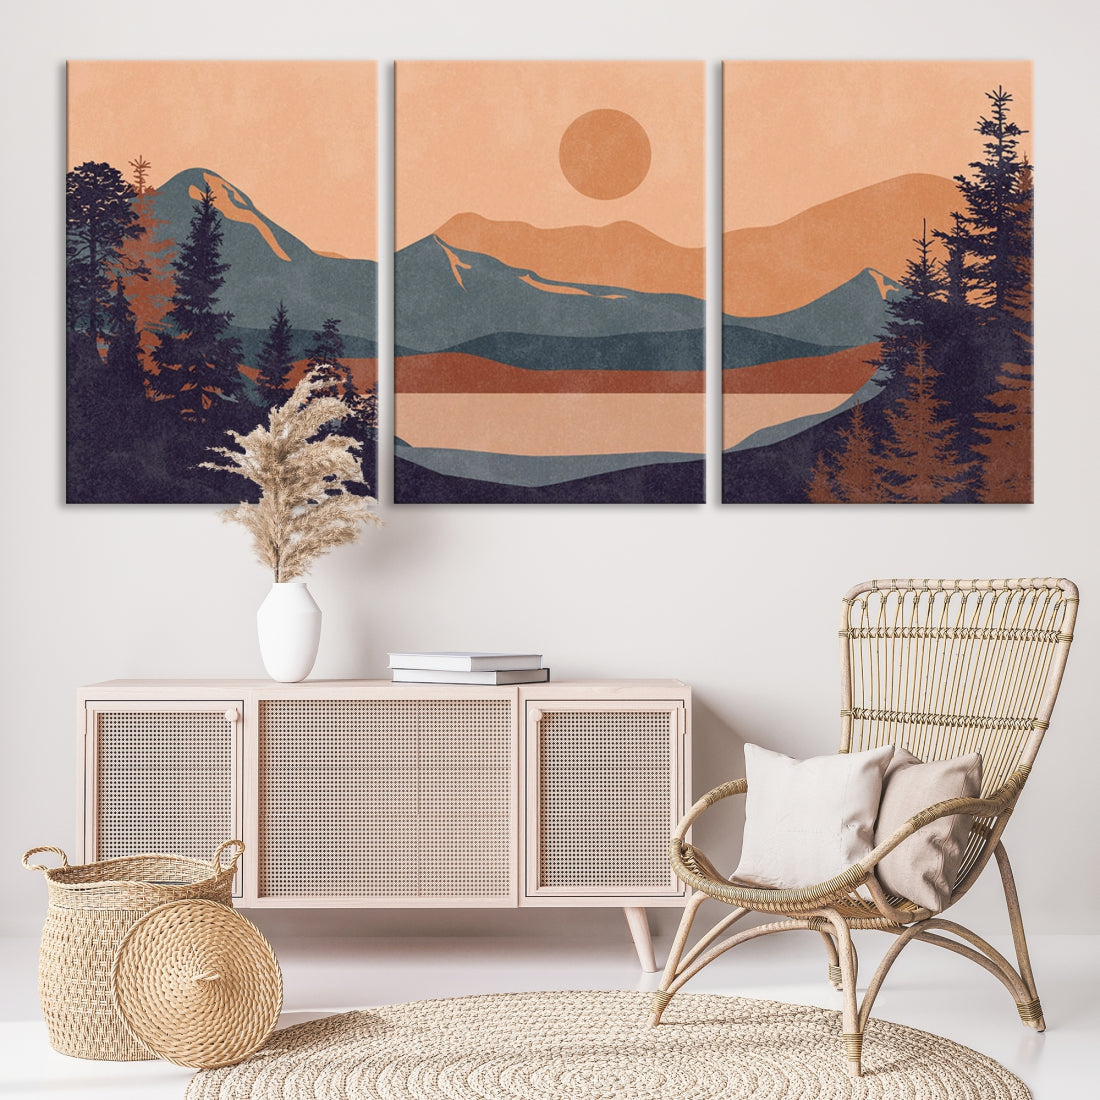 Boho Wall Art Modern Landscape Painting on Canvas Print Ready to Hang